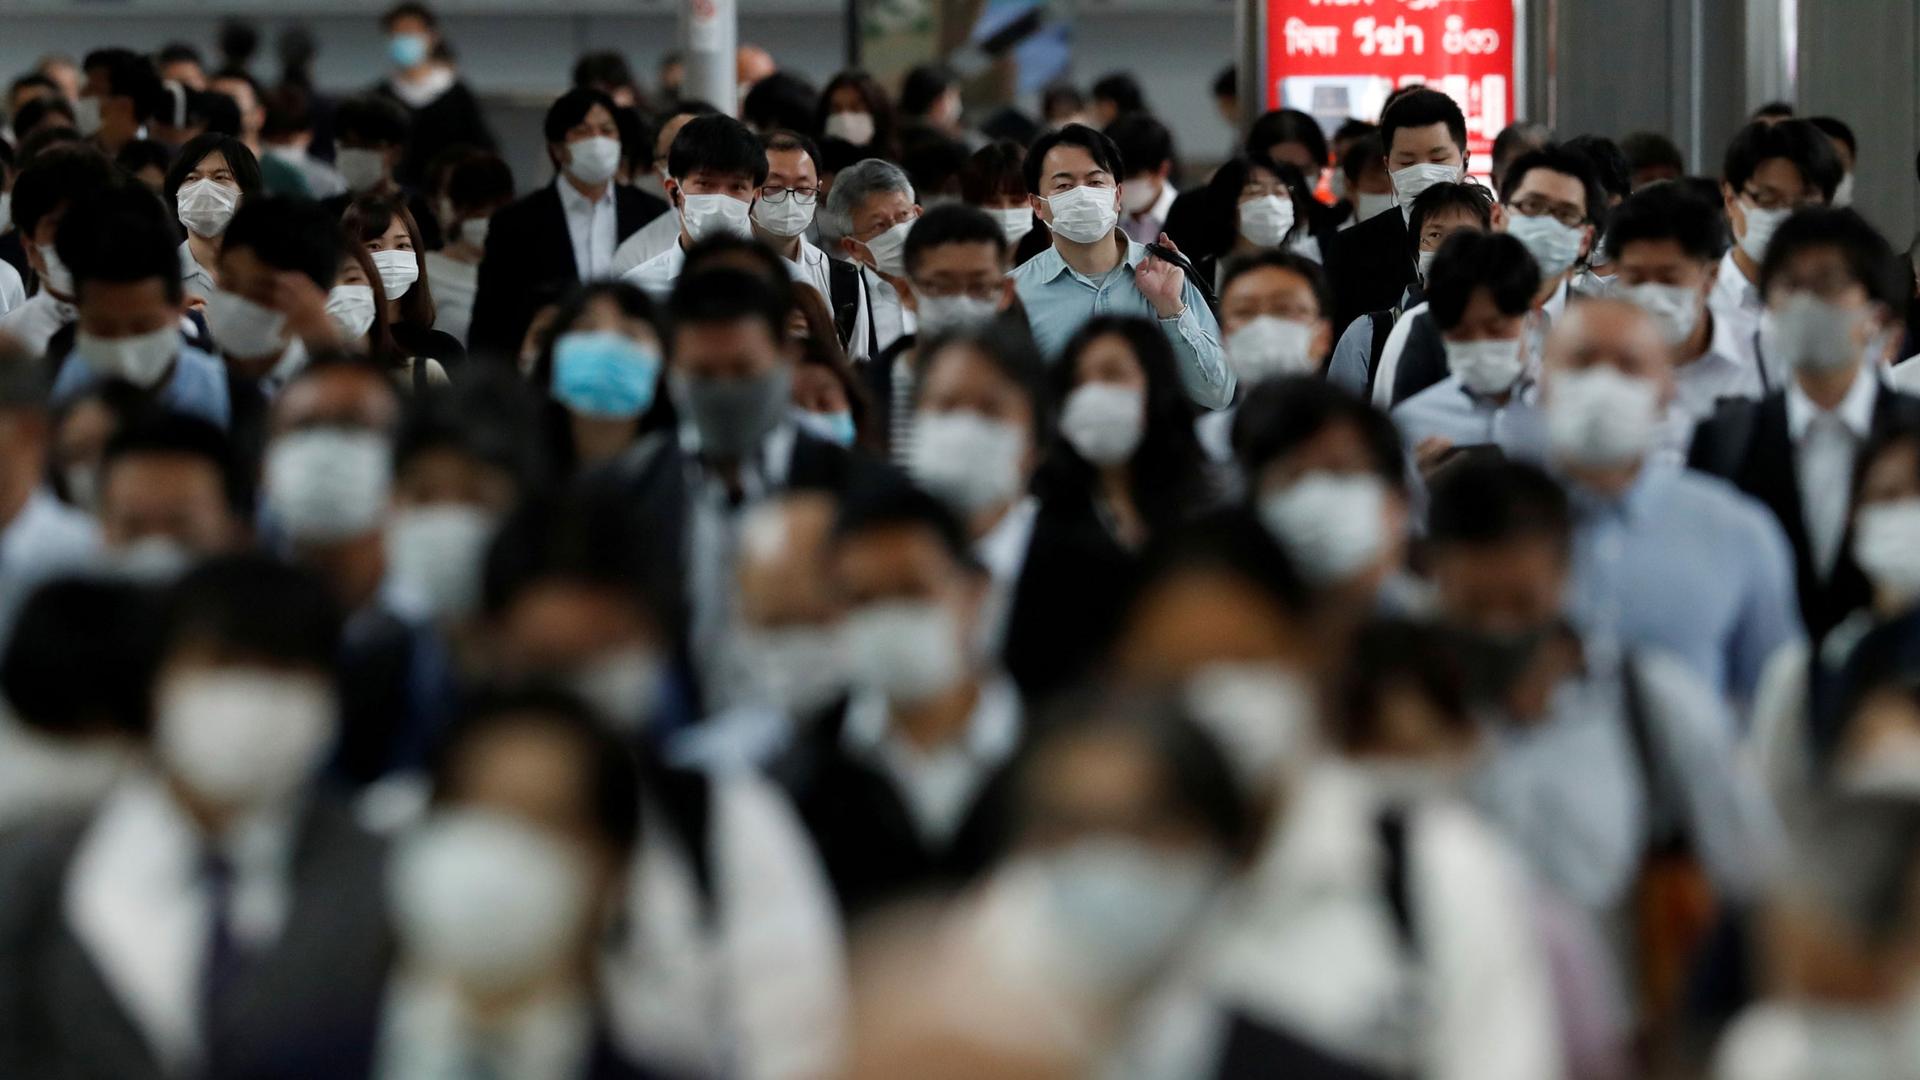 A large crowd of people are shown walking and wearing protective face masks in a train station.